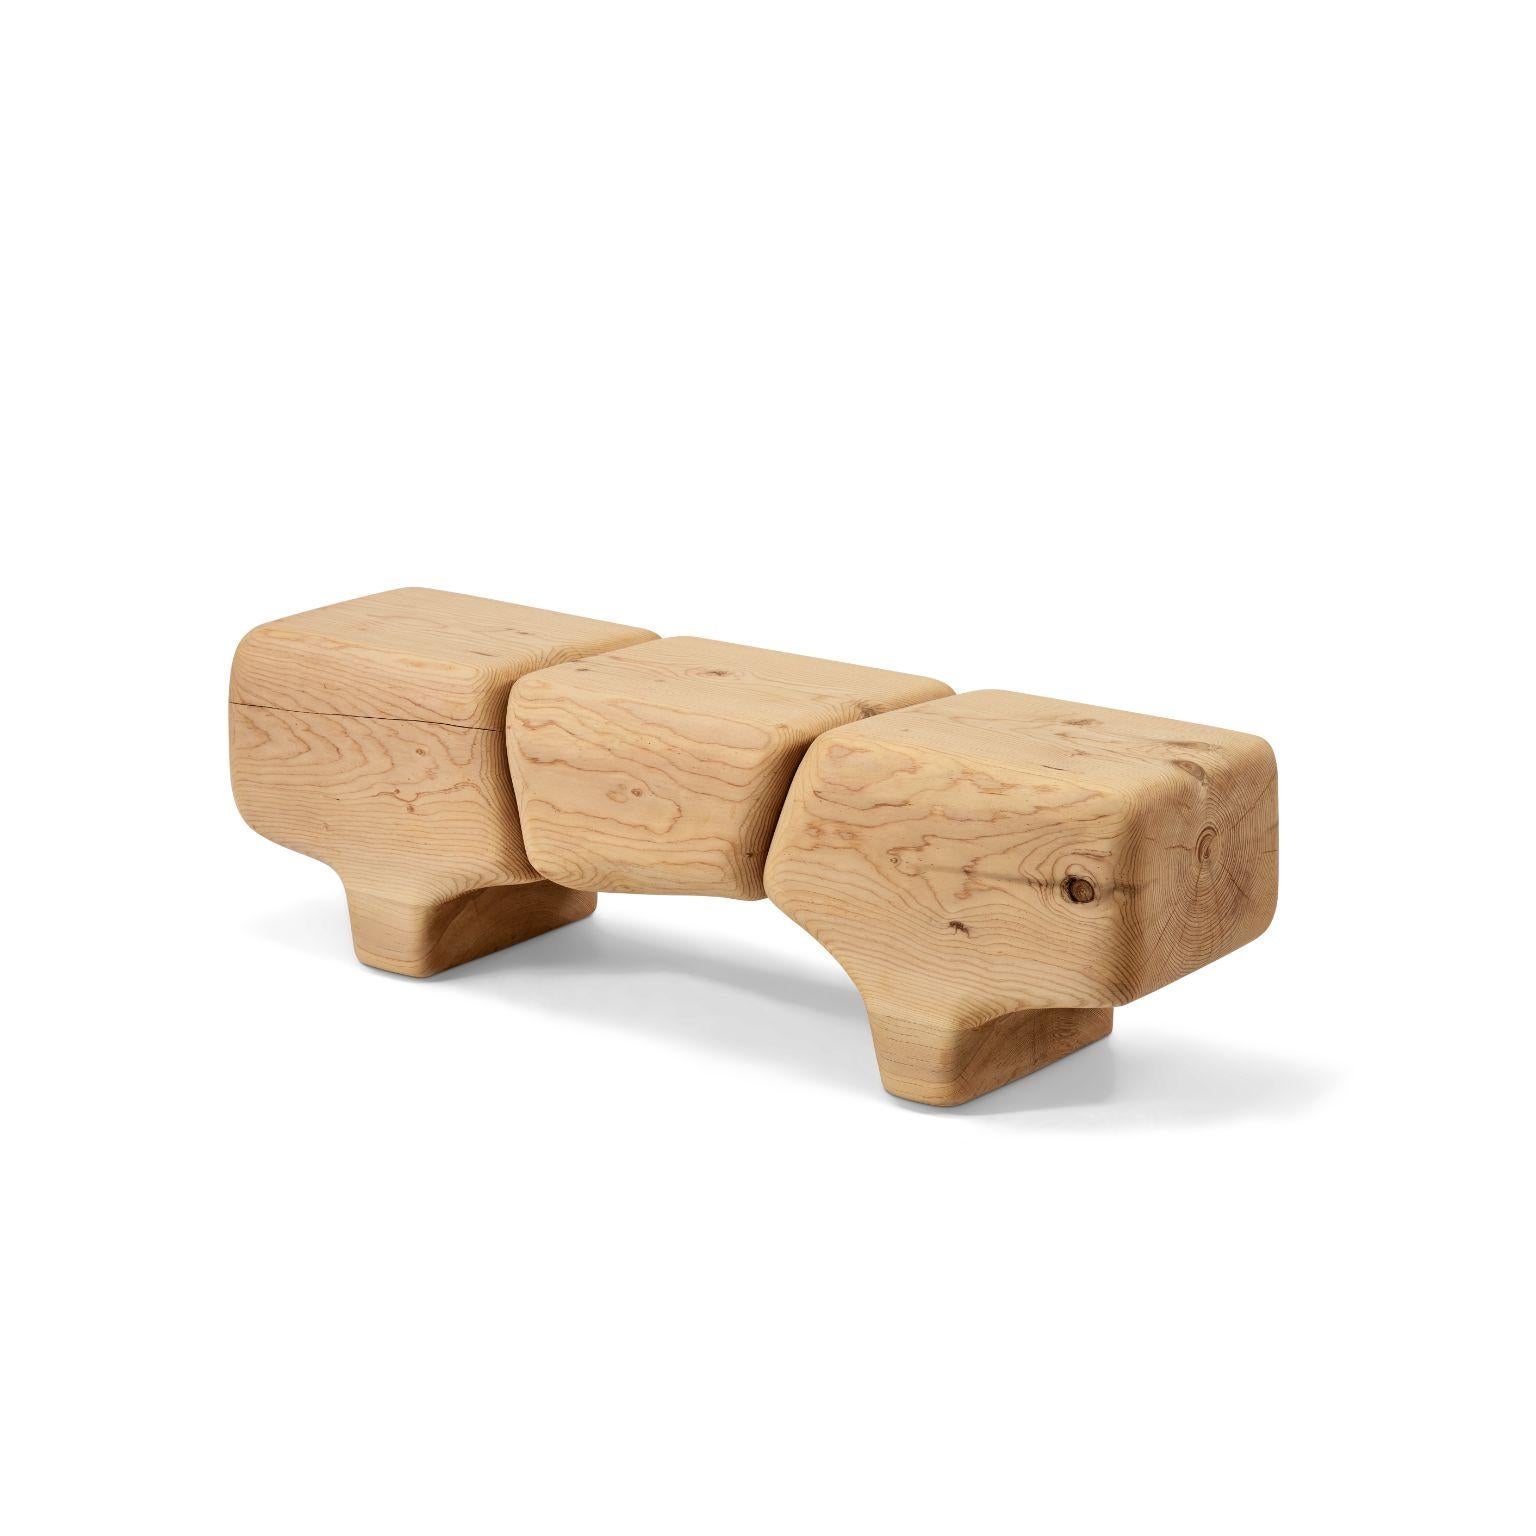 Wood Aromatique Cedre Sculptural Bench by Contemporary Ecowood For Sale